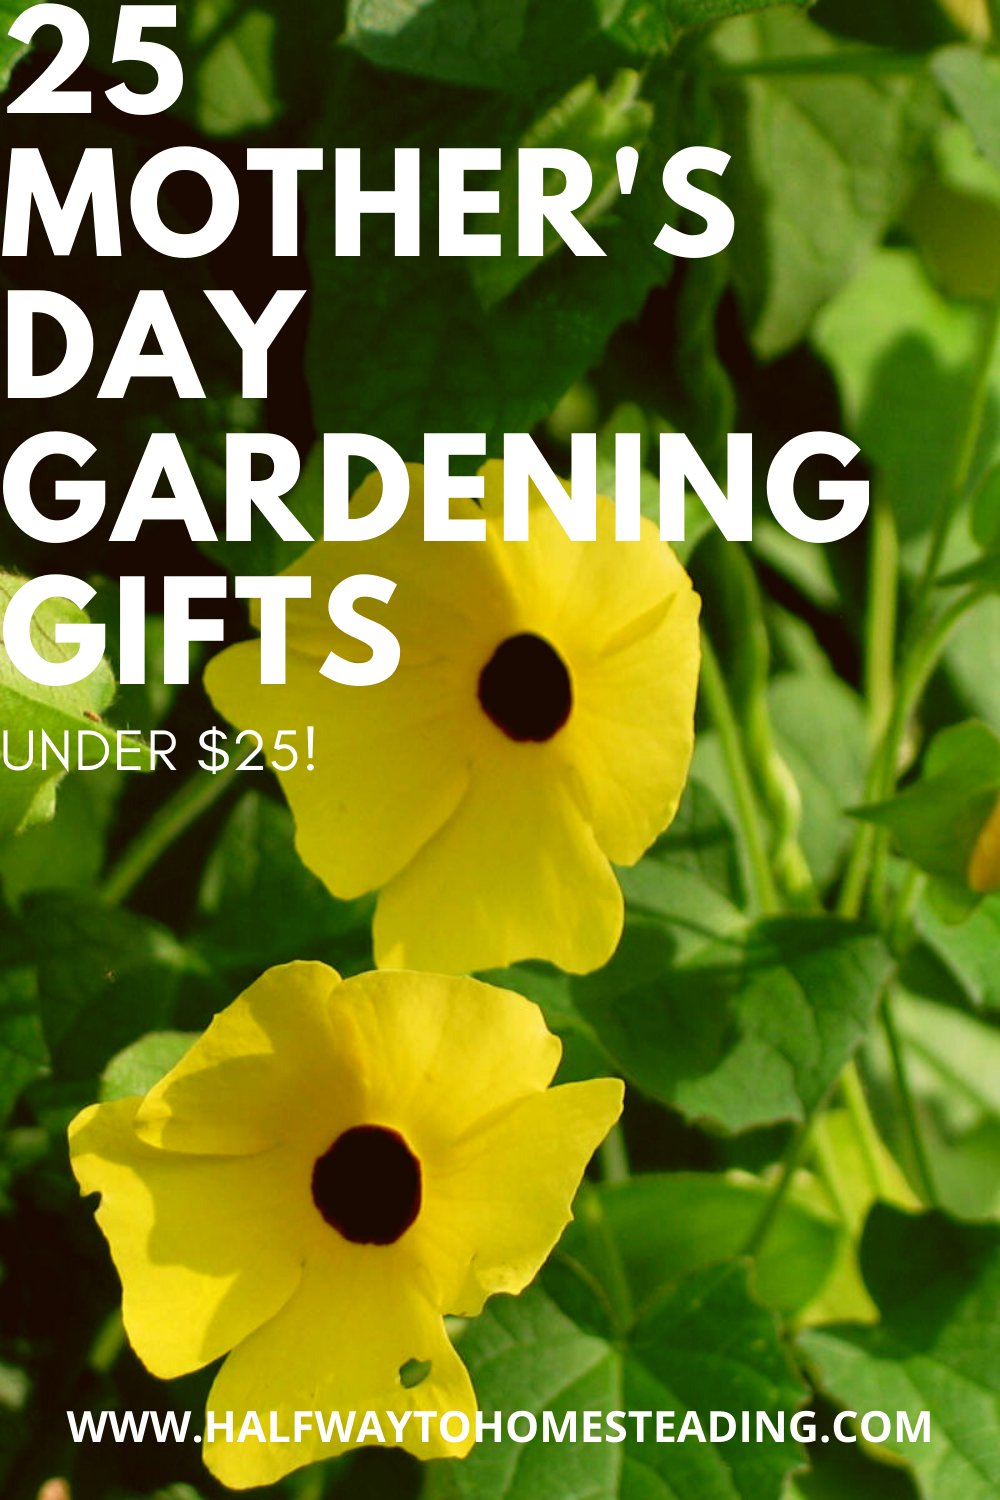 25 Mother's Day Gardening Gifts Under $25